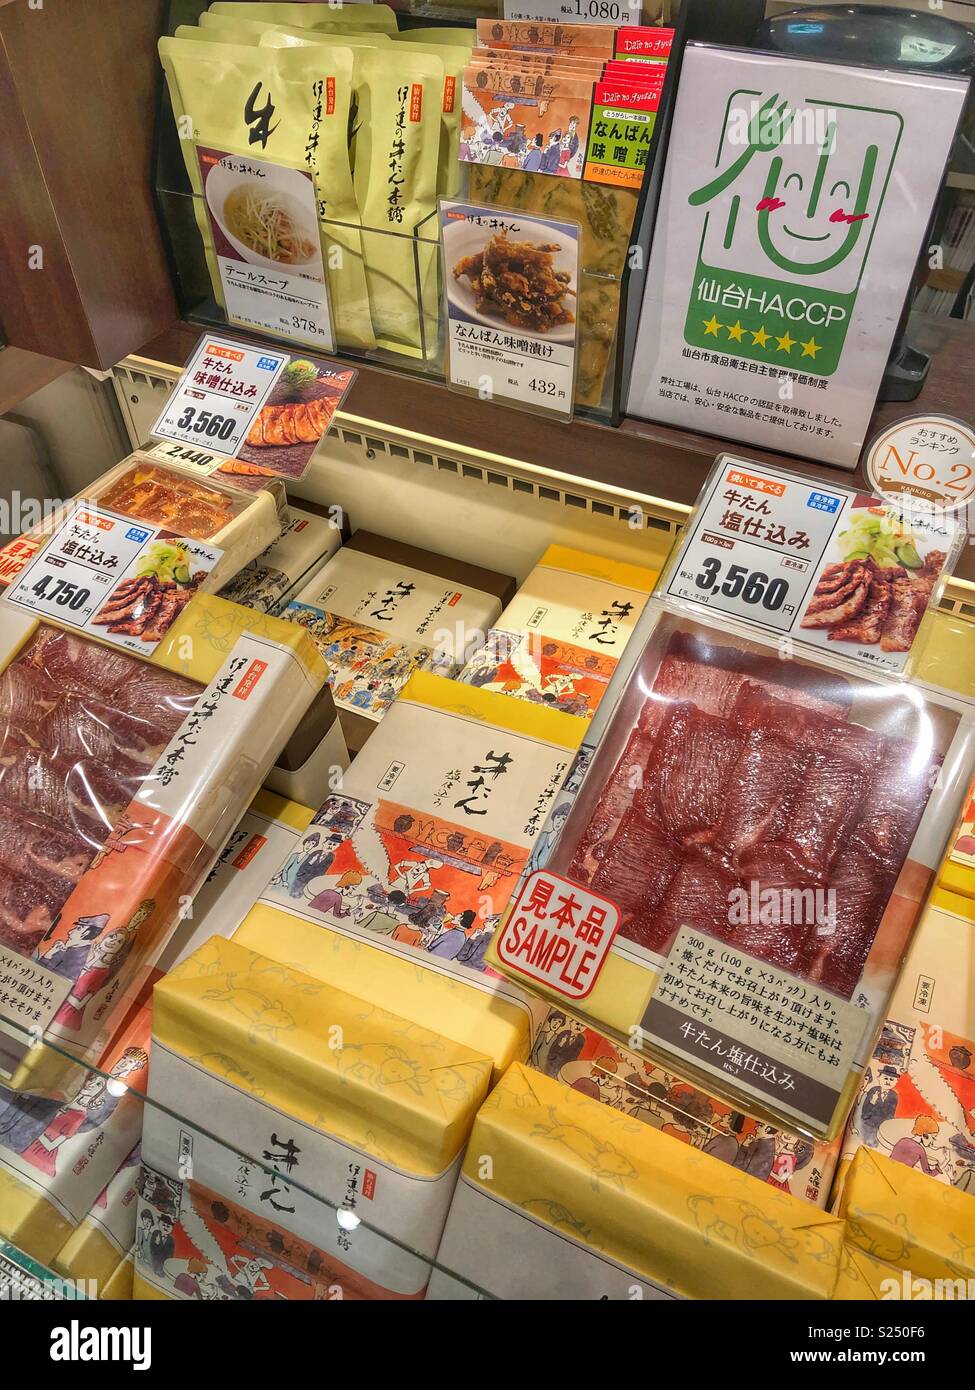 Packaged meats at a Japanese deli. Stock Photo